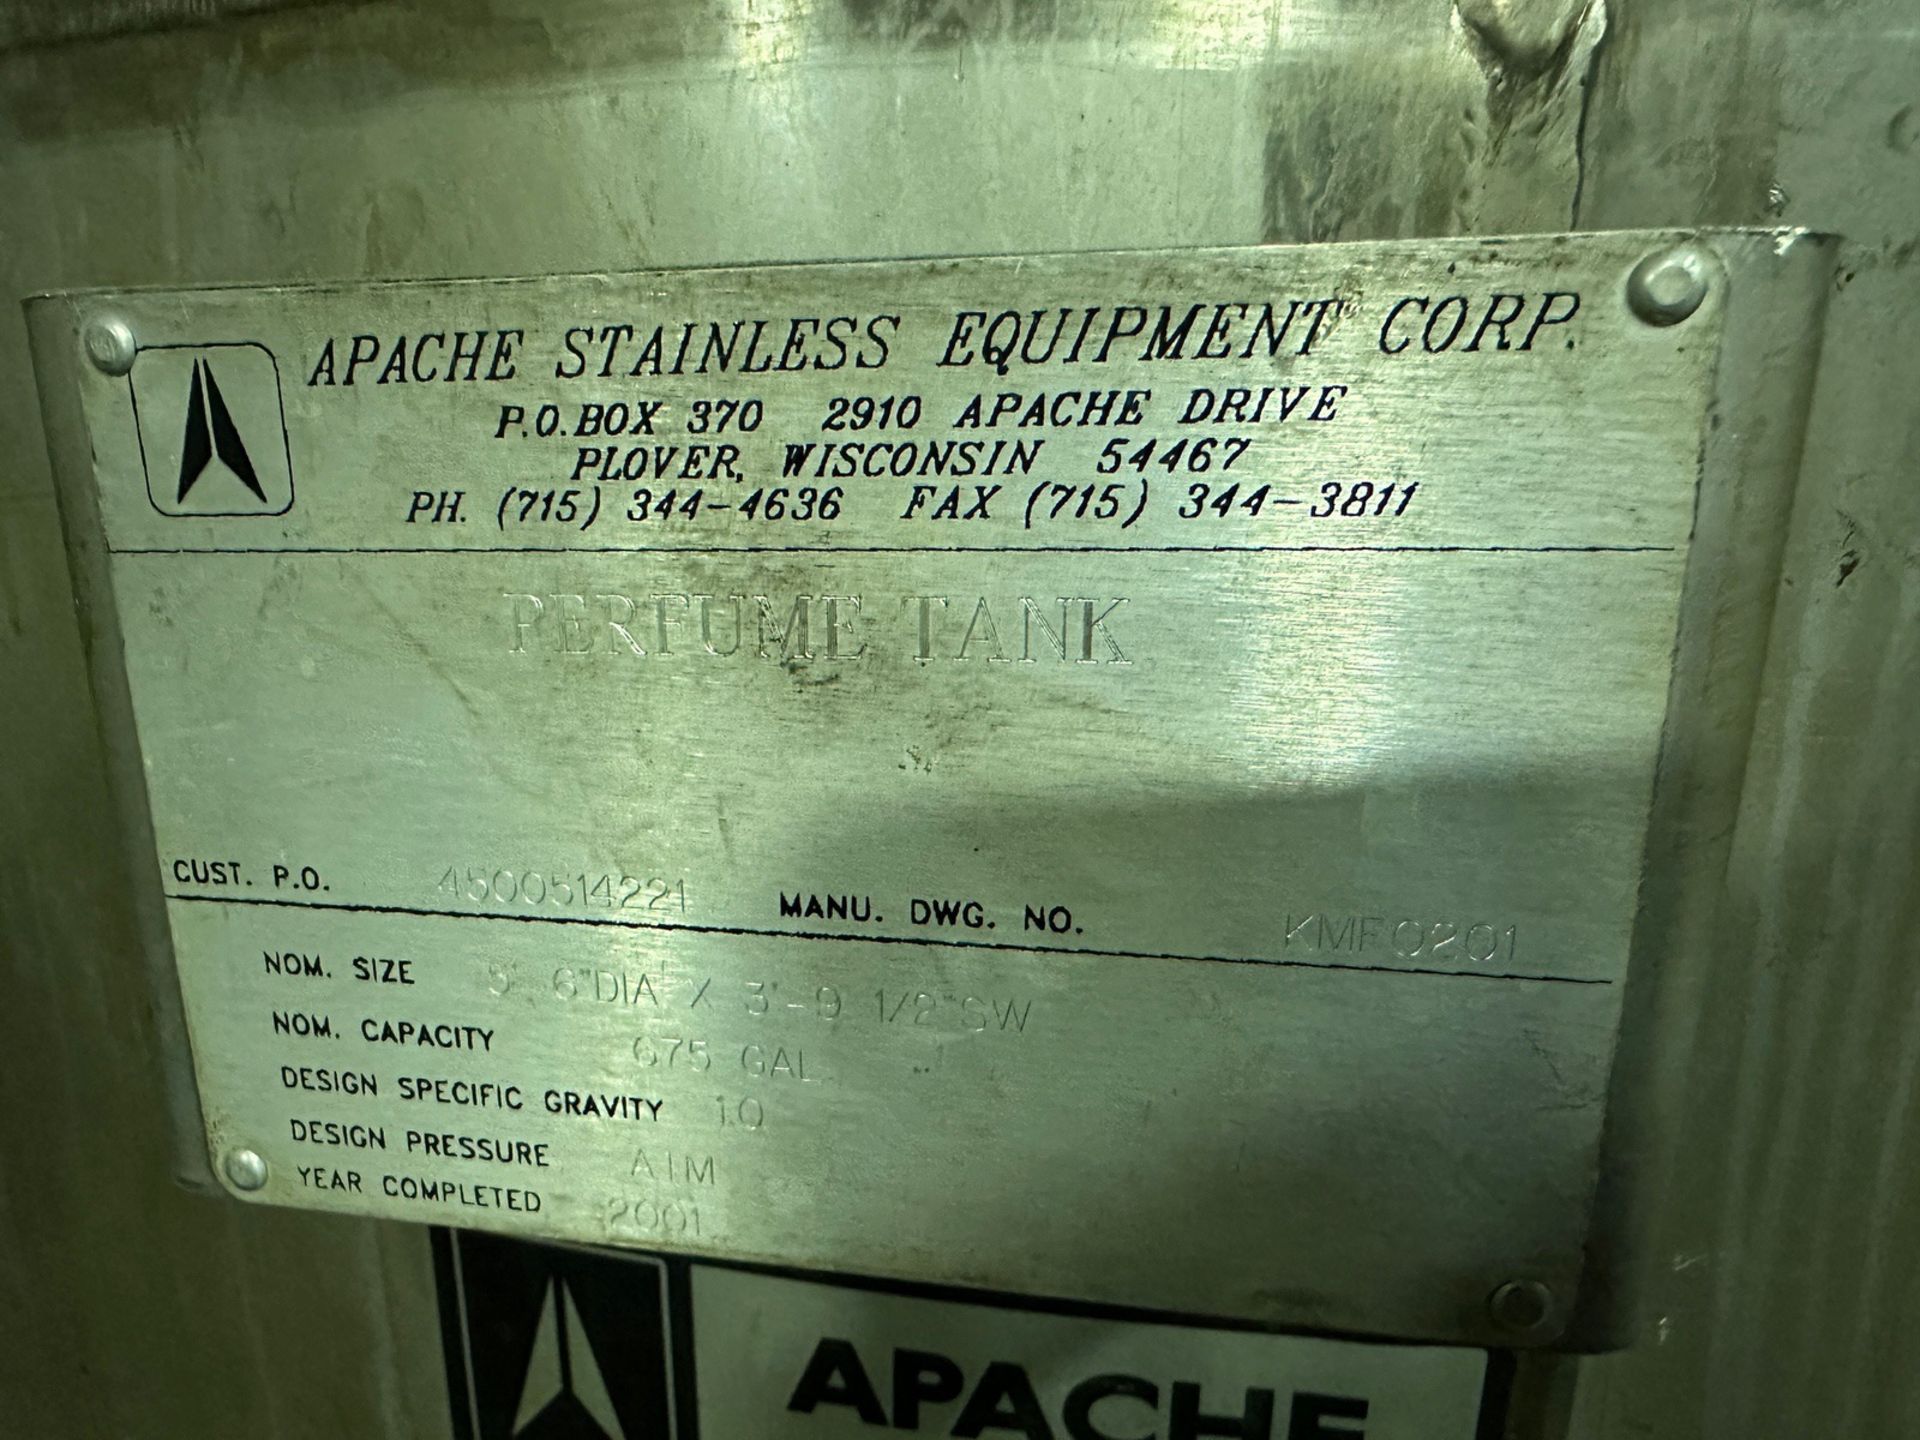 Apache 675 Gallon Stainless Steel Perfume Tank (Approx. 5'6" Diameter and 5'6" O.H. | Rig Fee $200 - Image 3 of 3